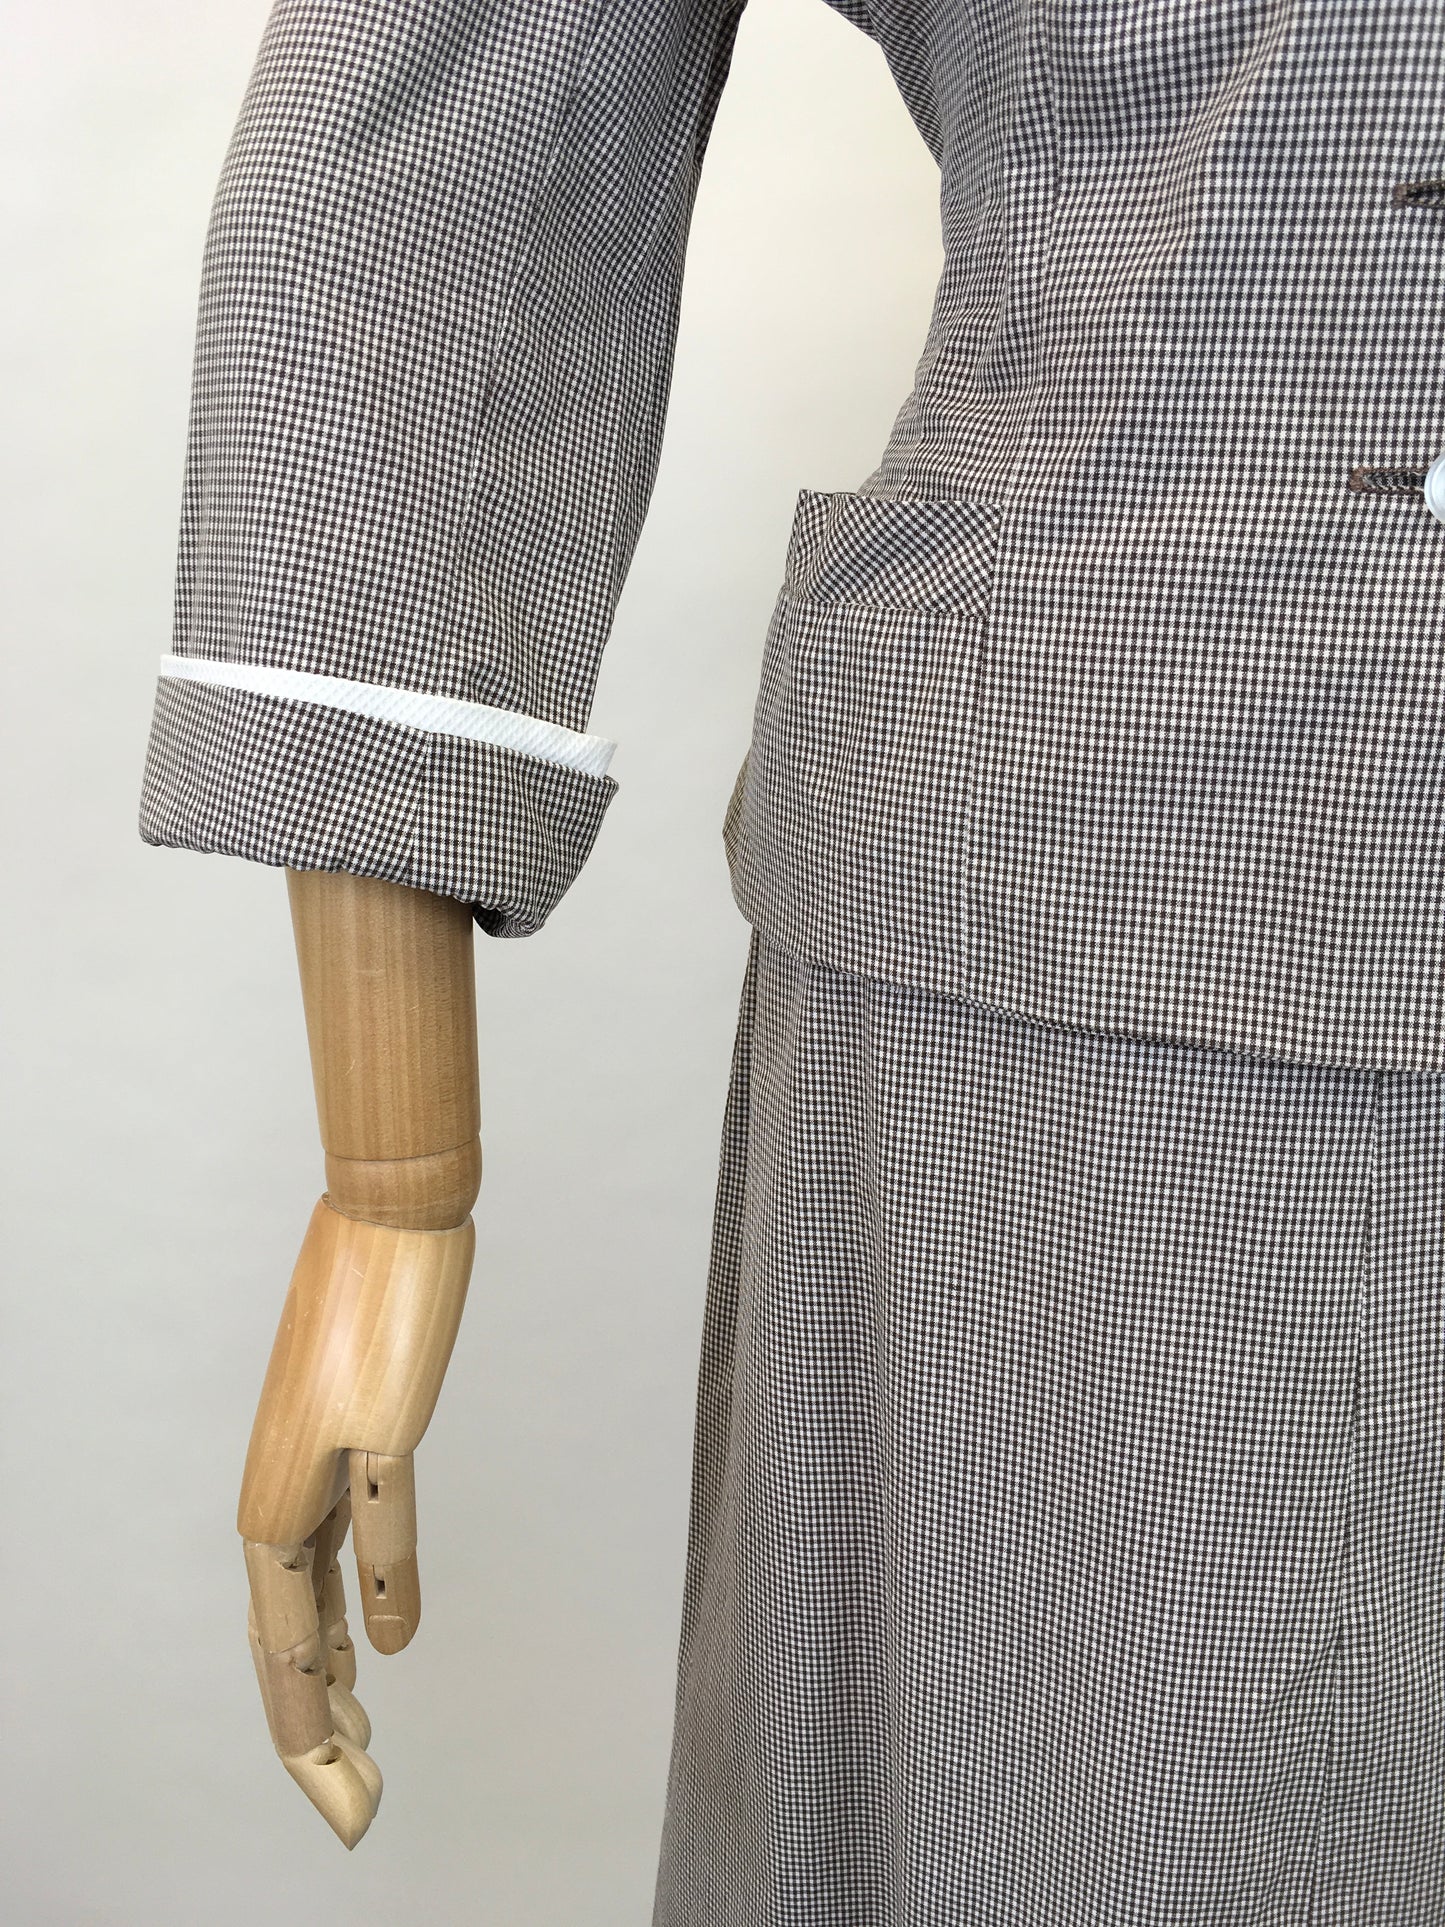 Original 1950’s ‘ Glenhaven ‘ Summer Suit - In A Brown and White Gingham Check